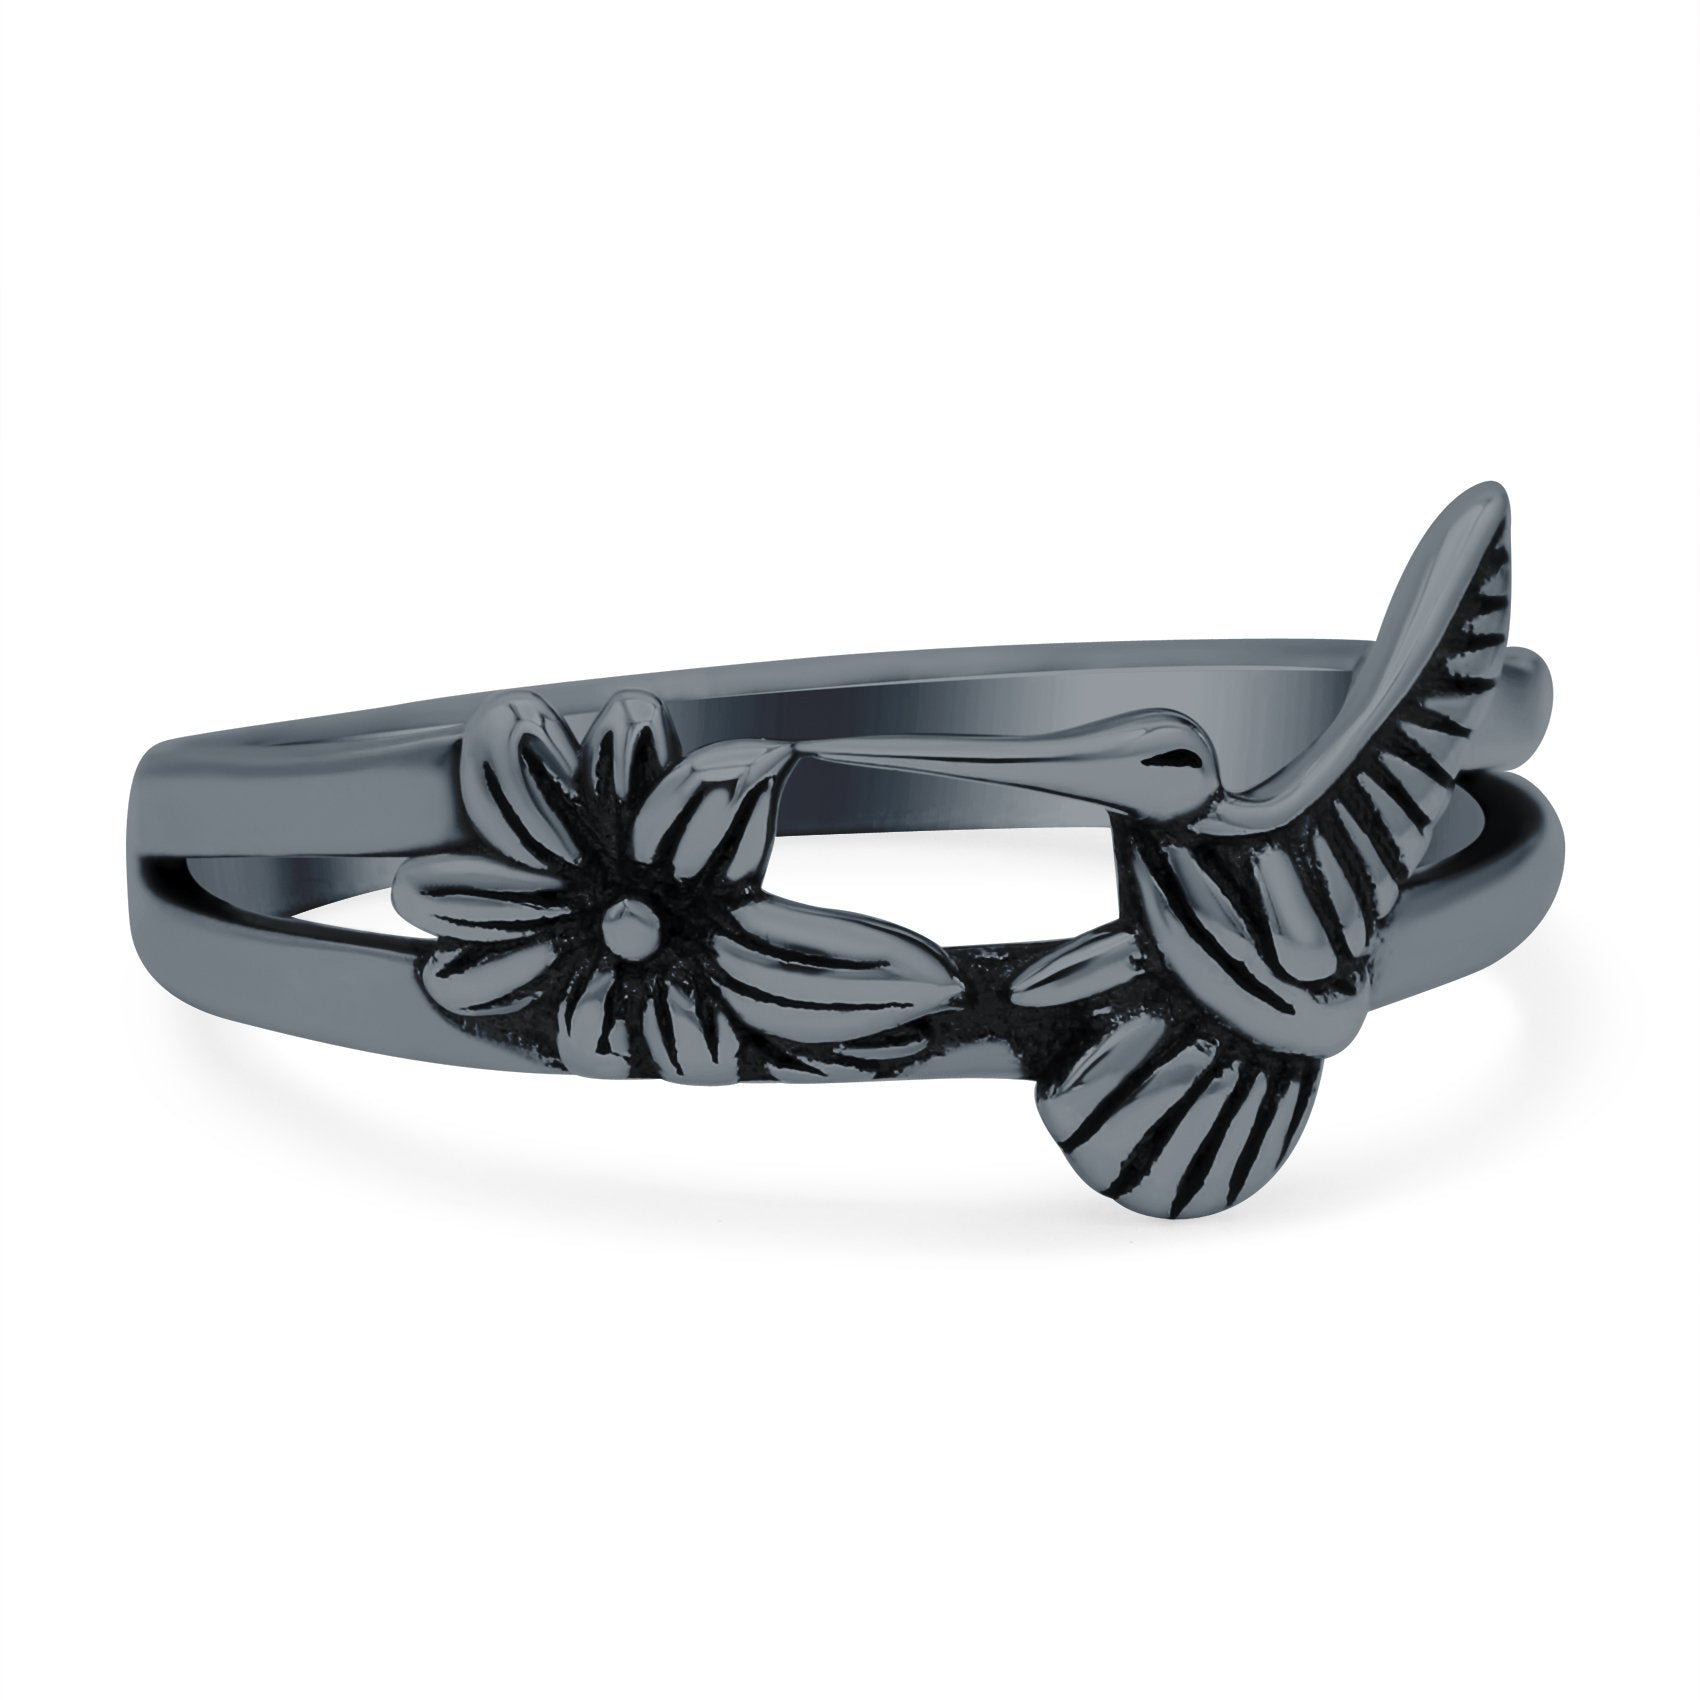 Flower Hummingbird Ring Oxidized Band Solid 925 Sterling Silver Thumb Ring (3.5mm))